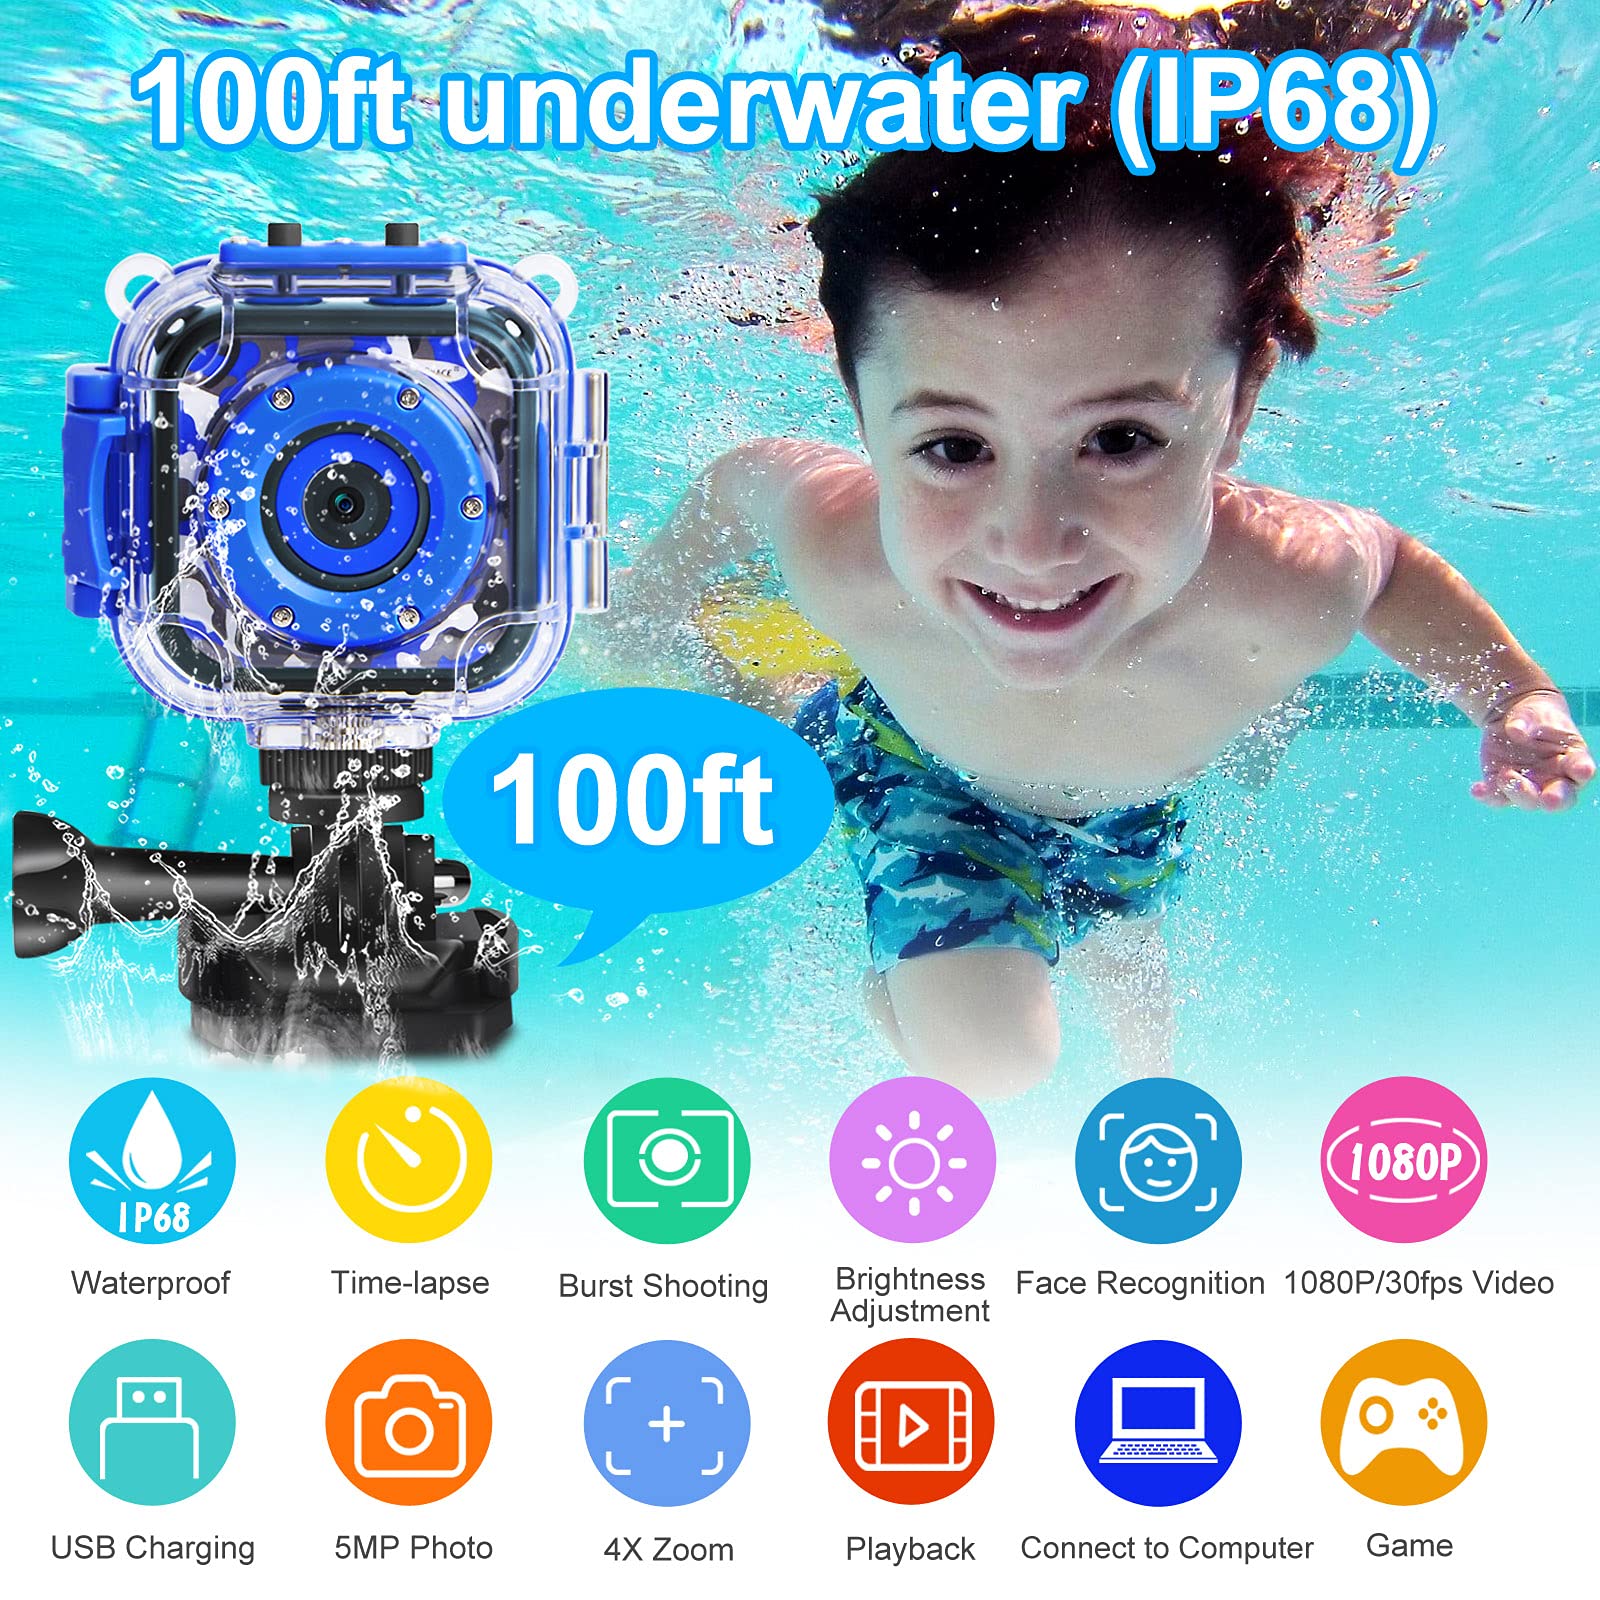 PROGRACE Kids Camera Waterproof Boys - Toy Gifts for Boy Kids Video Camera Underwater Recorder HD Kids Digital Camera Toddler Children Camcorder Age 3 4 5 6 7 8 9 10 Year Old Birthday Presents